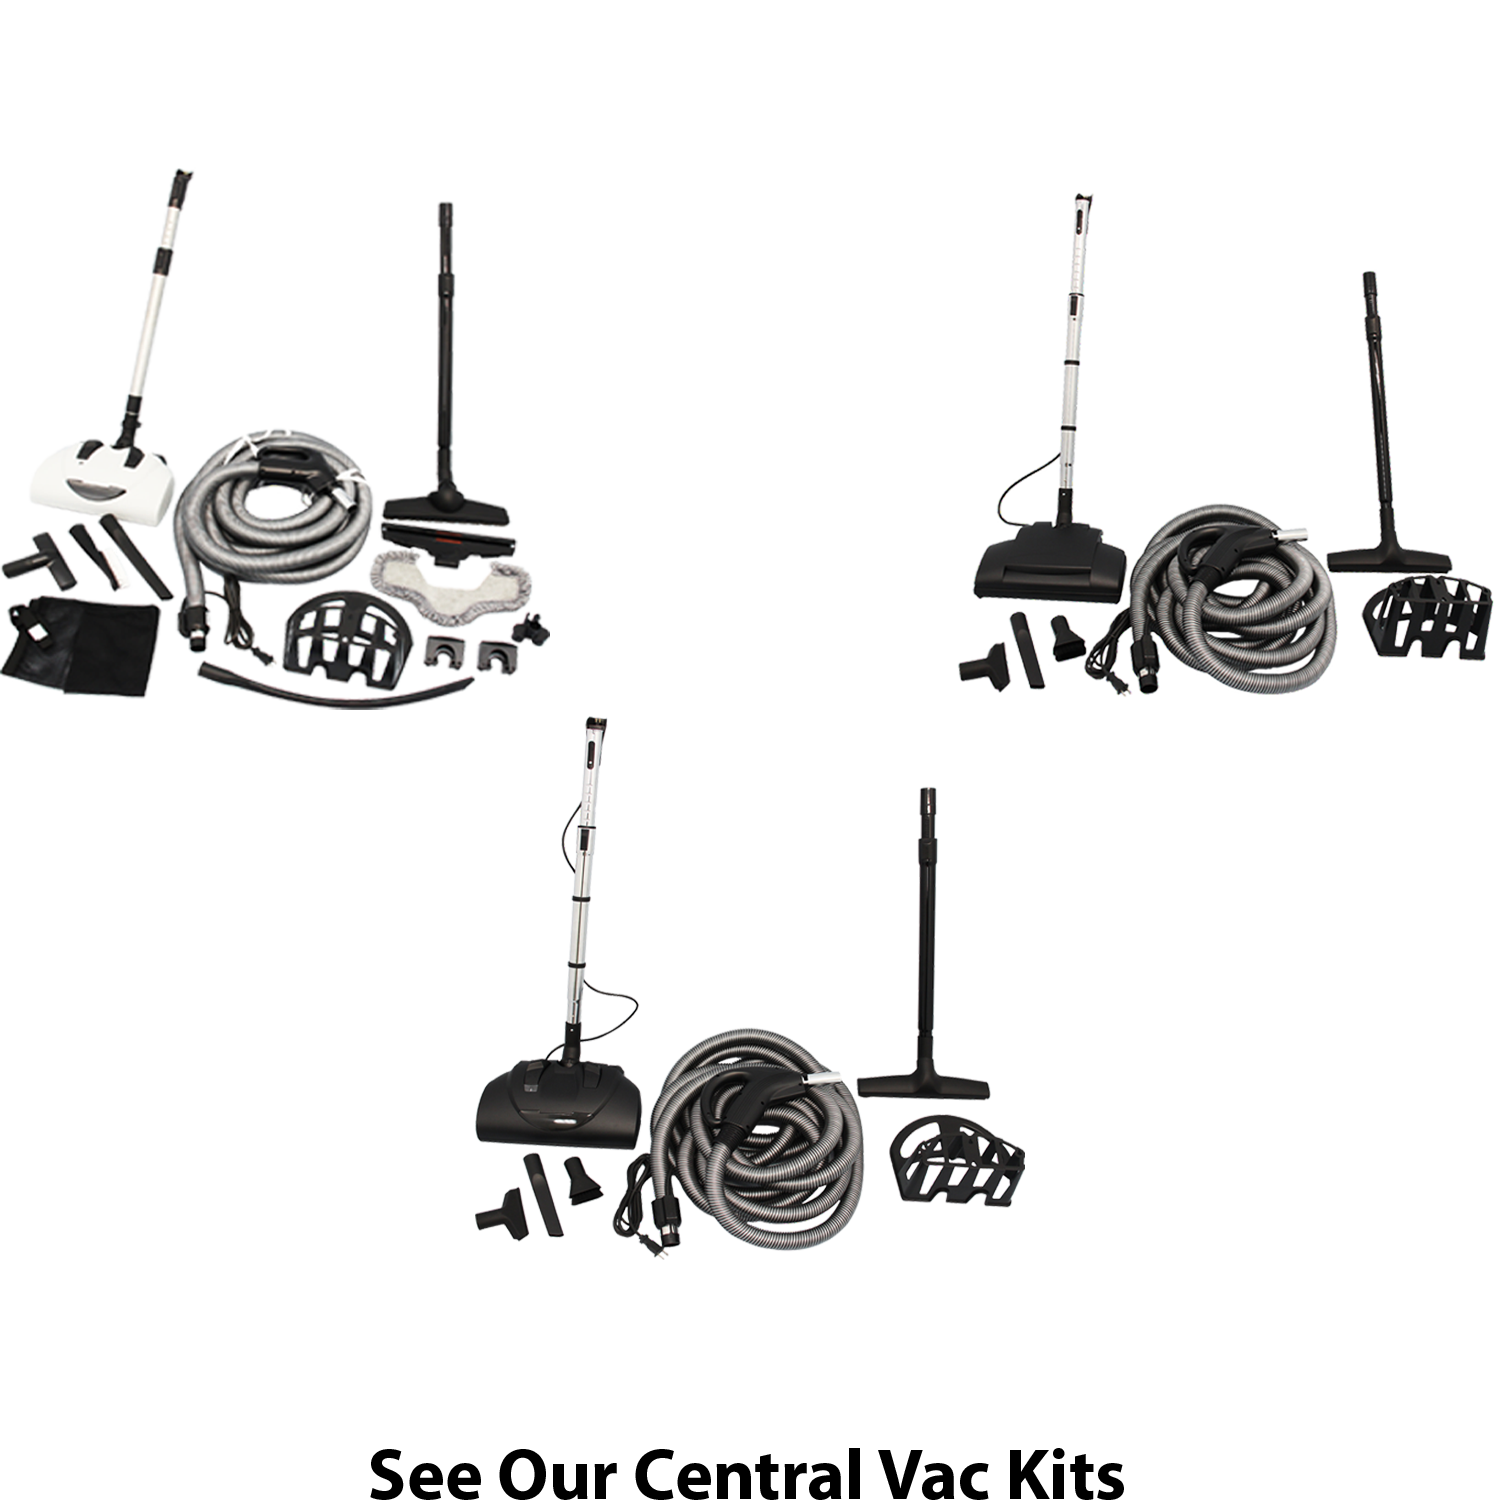 Check Out Our Selection of Central Vacuum Kits!